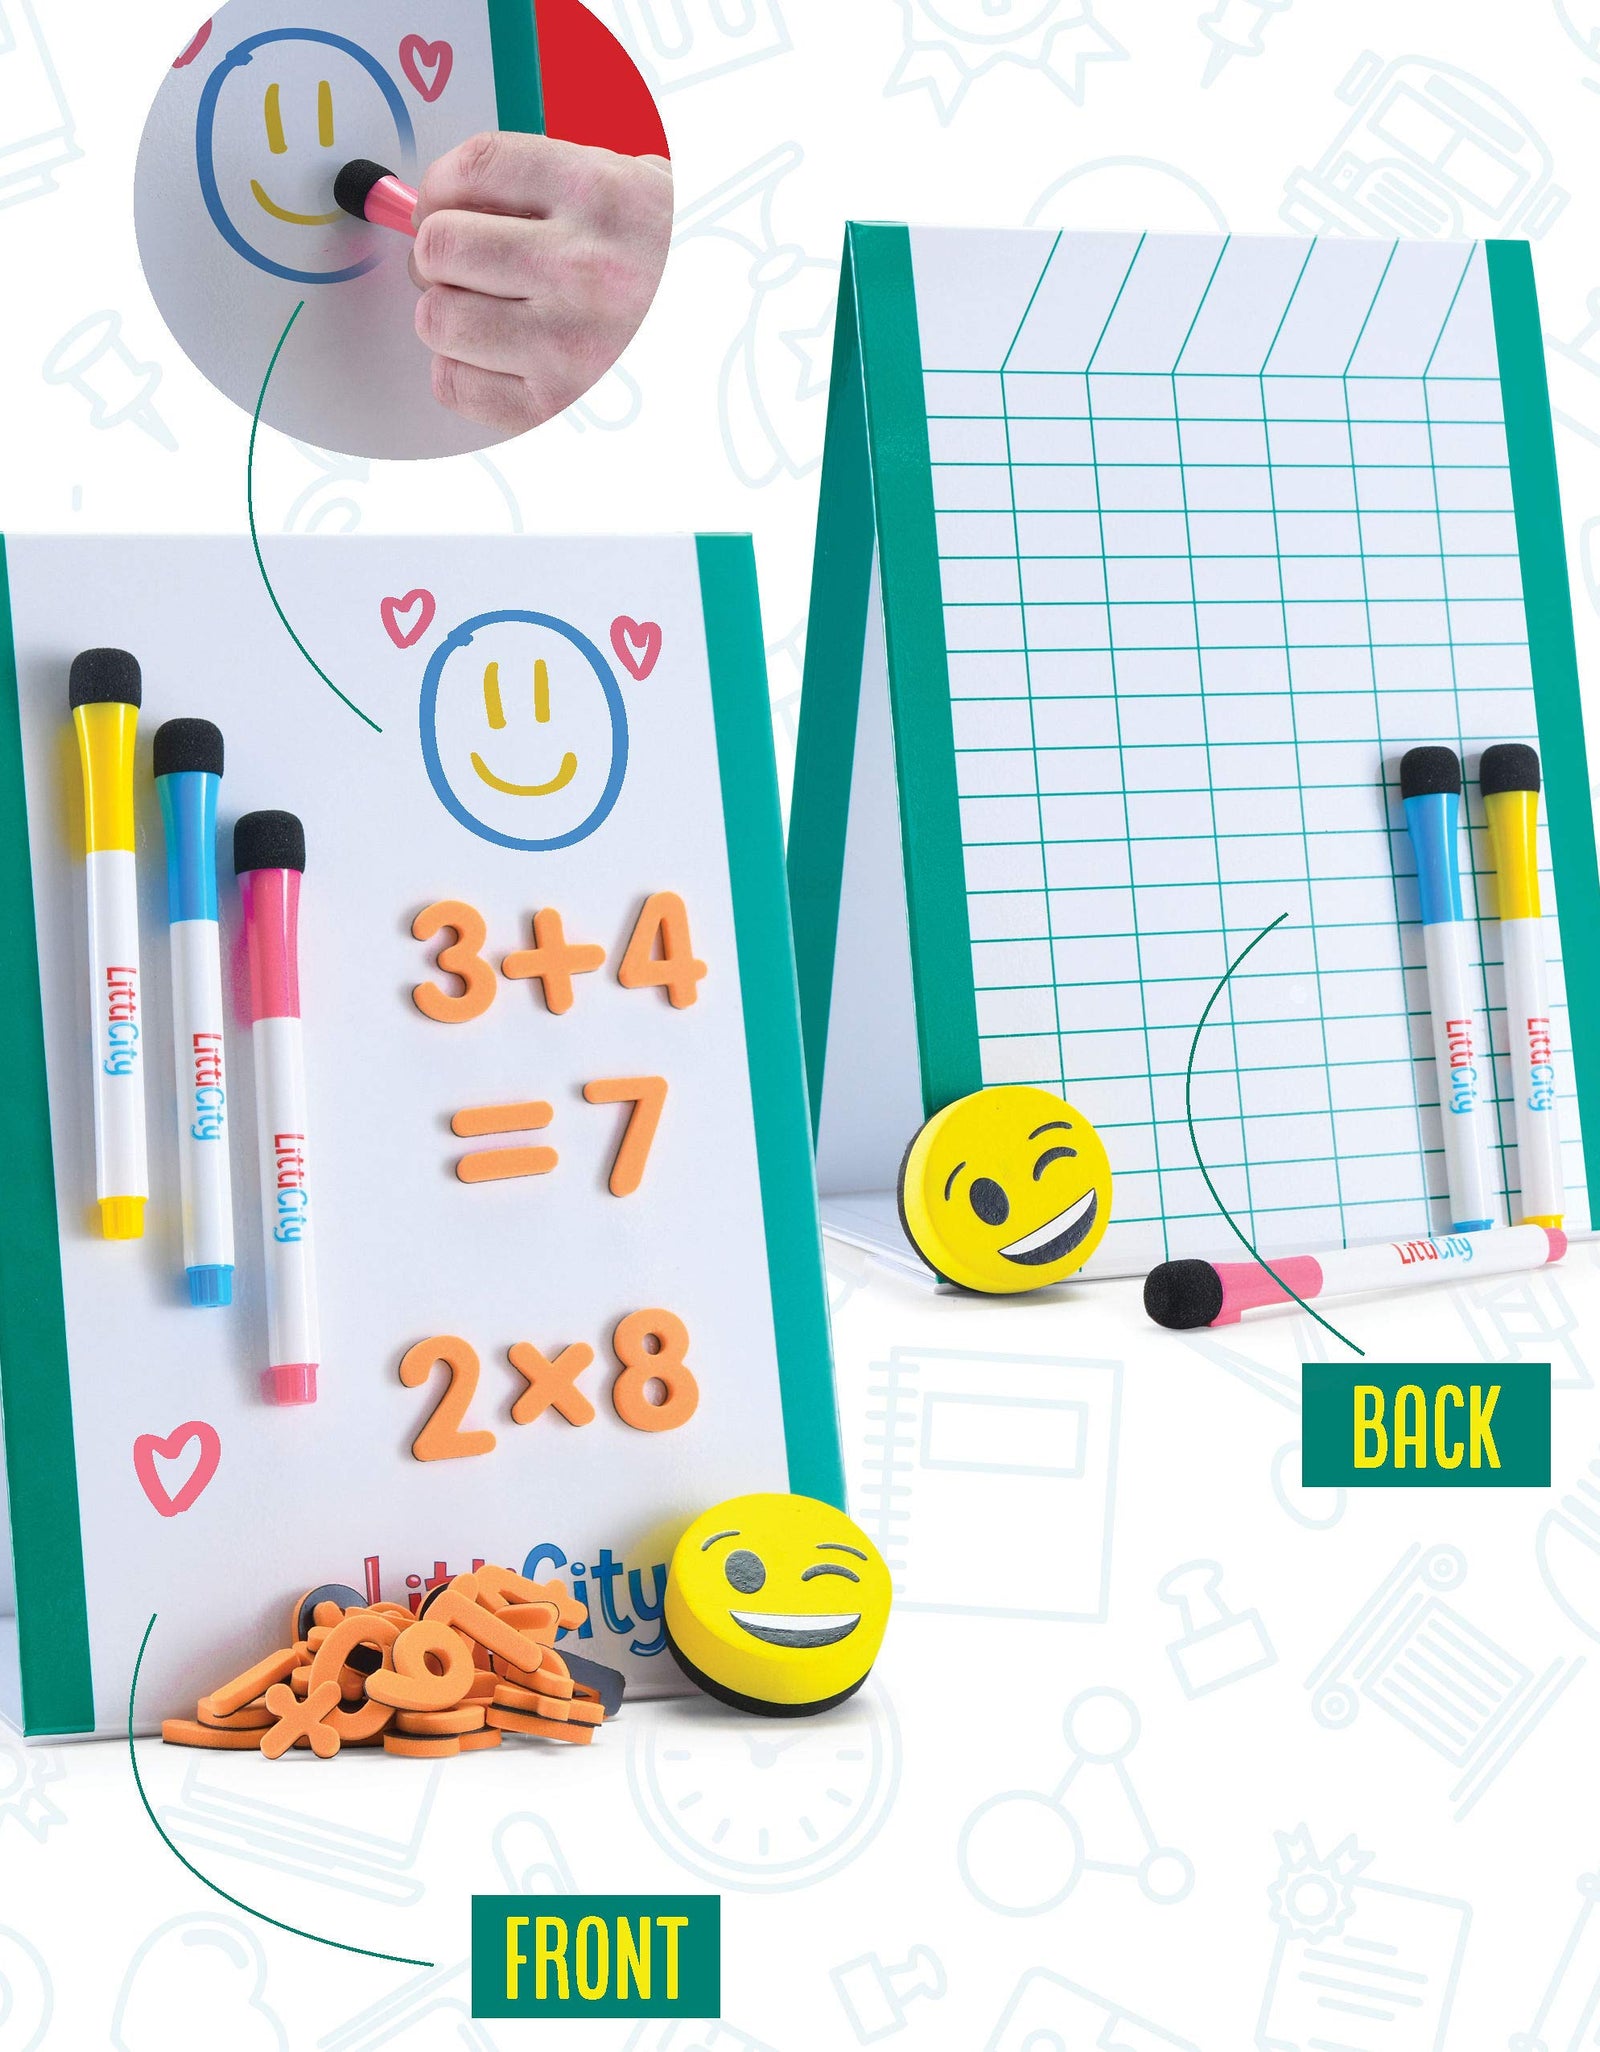 Litti City Learning & Education Toys Pretend Play Teacher Set Includes Bag whiteboard Markers and More Hours of Fun with This Interactive Play Learning Toys for 3 Year olds and up.